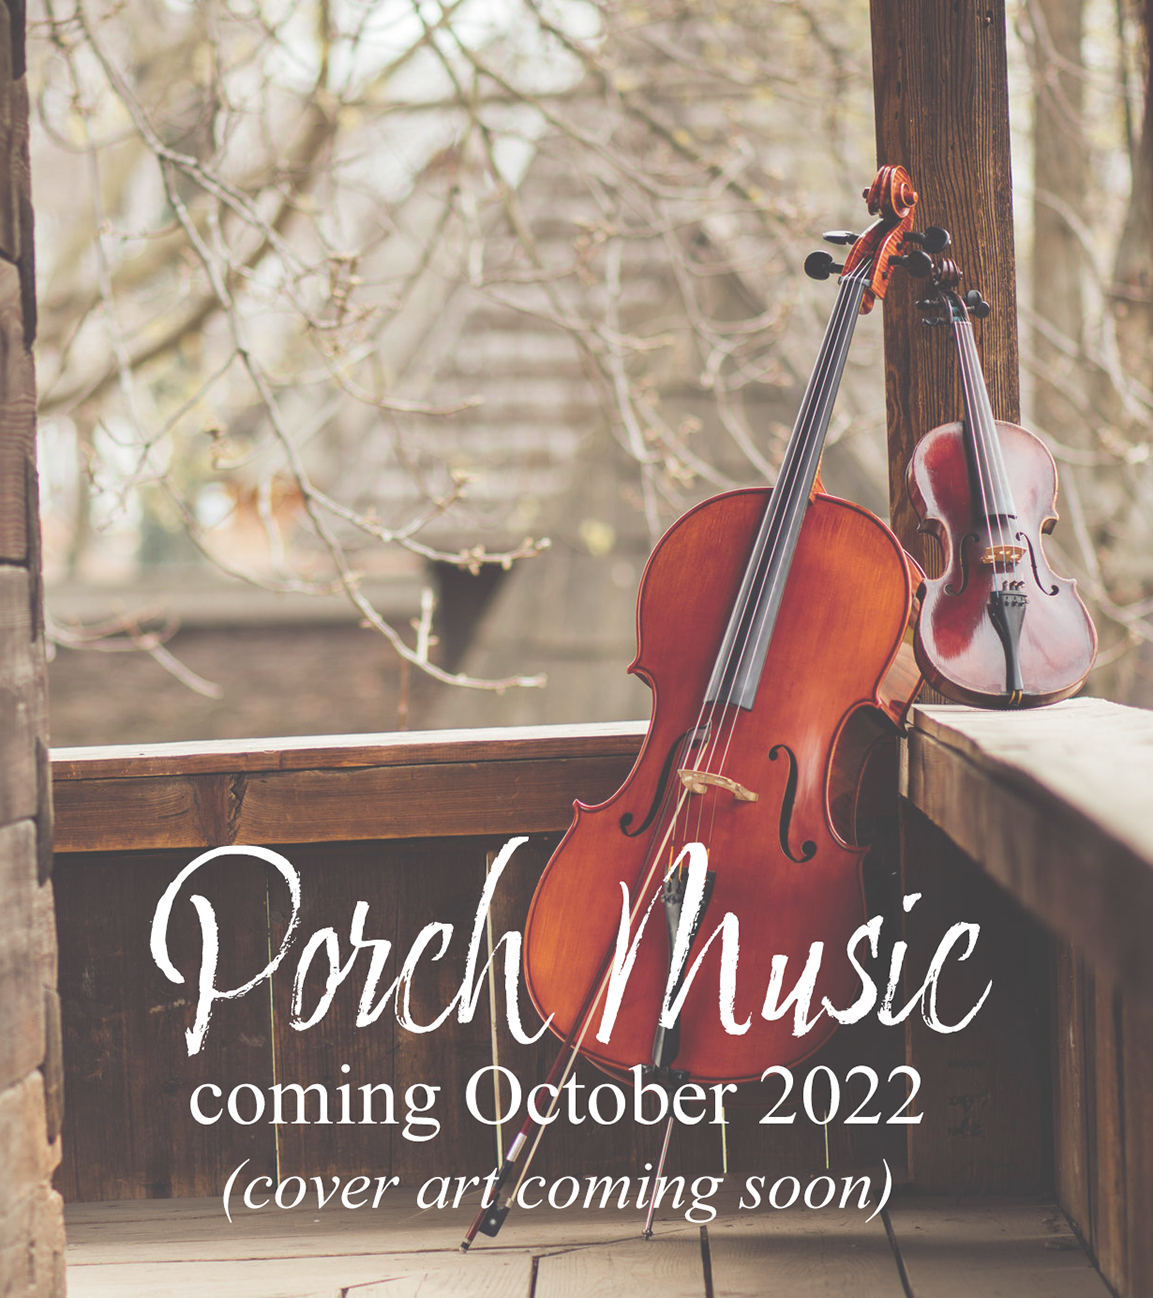 Porch Music - coming soon!